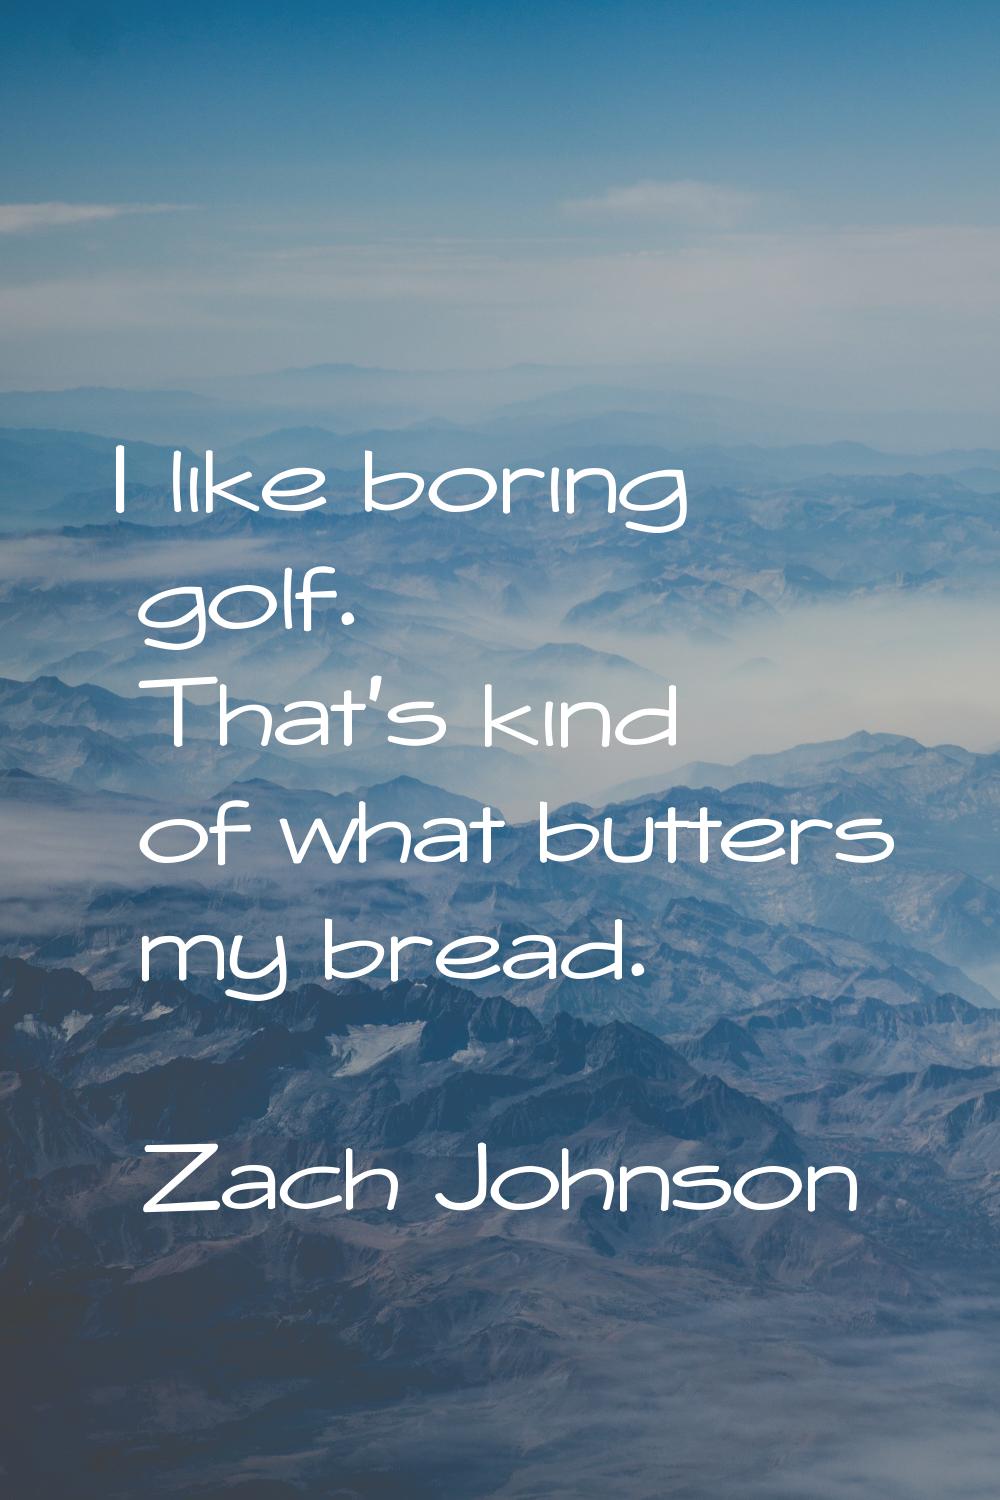 I like boring golf. That's kind of what butters my bread.